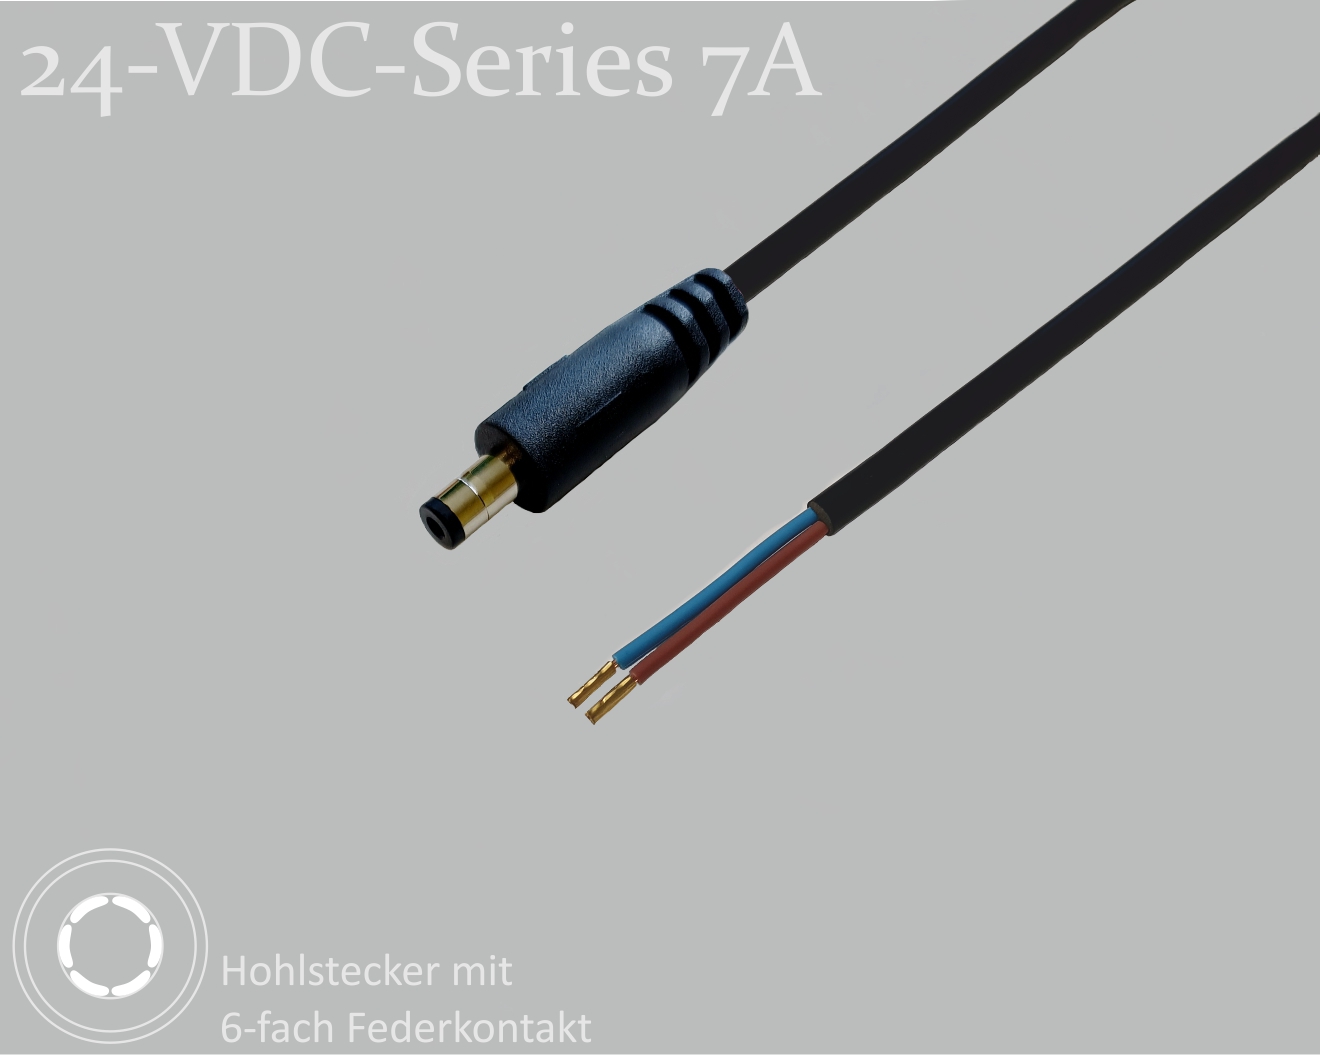 24-VDC-Series 7A, DC connection cable, DC plug with 4-spring contact 2.5x5.5x9.5mm, round cable 2x0.50mm², black, wire end sleeves, 0.75m